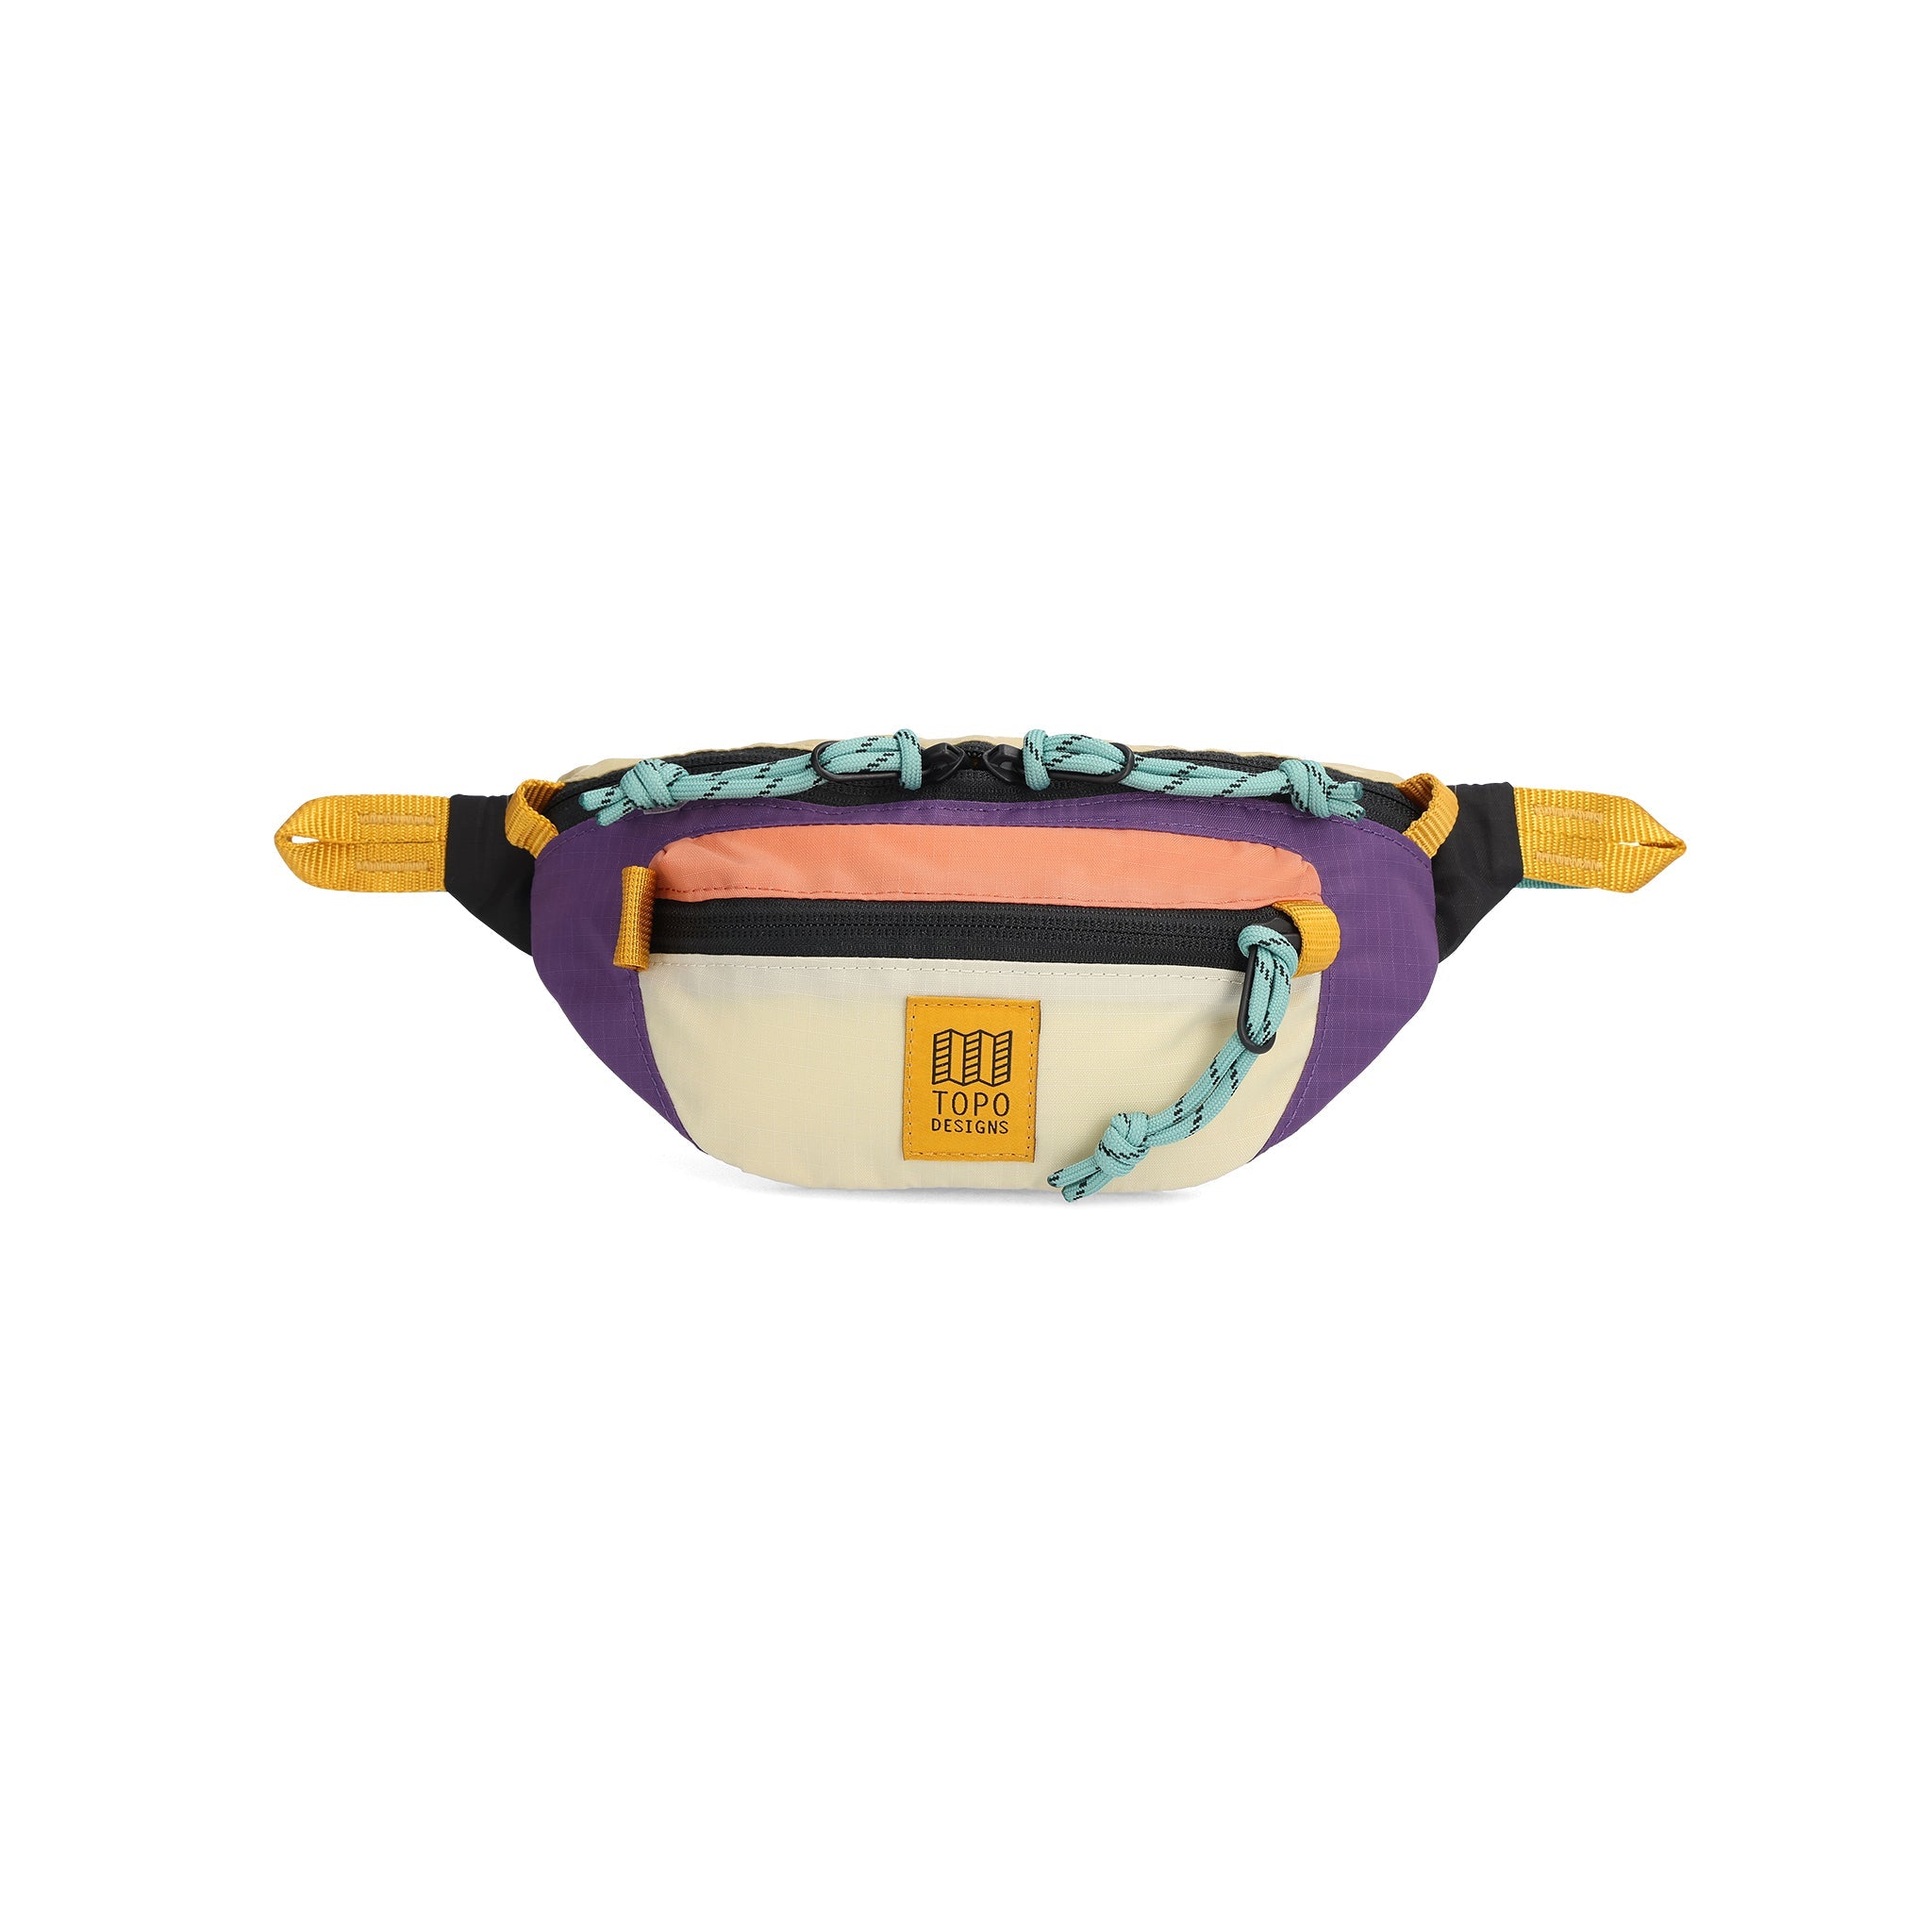 Front View of Topo Designs Mountain Waist Pack in "Loganberry / Bone White"